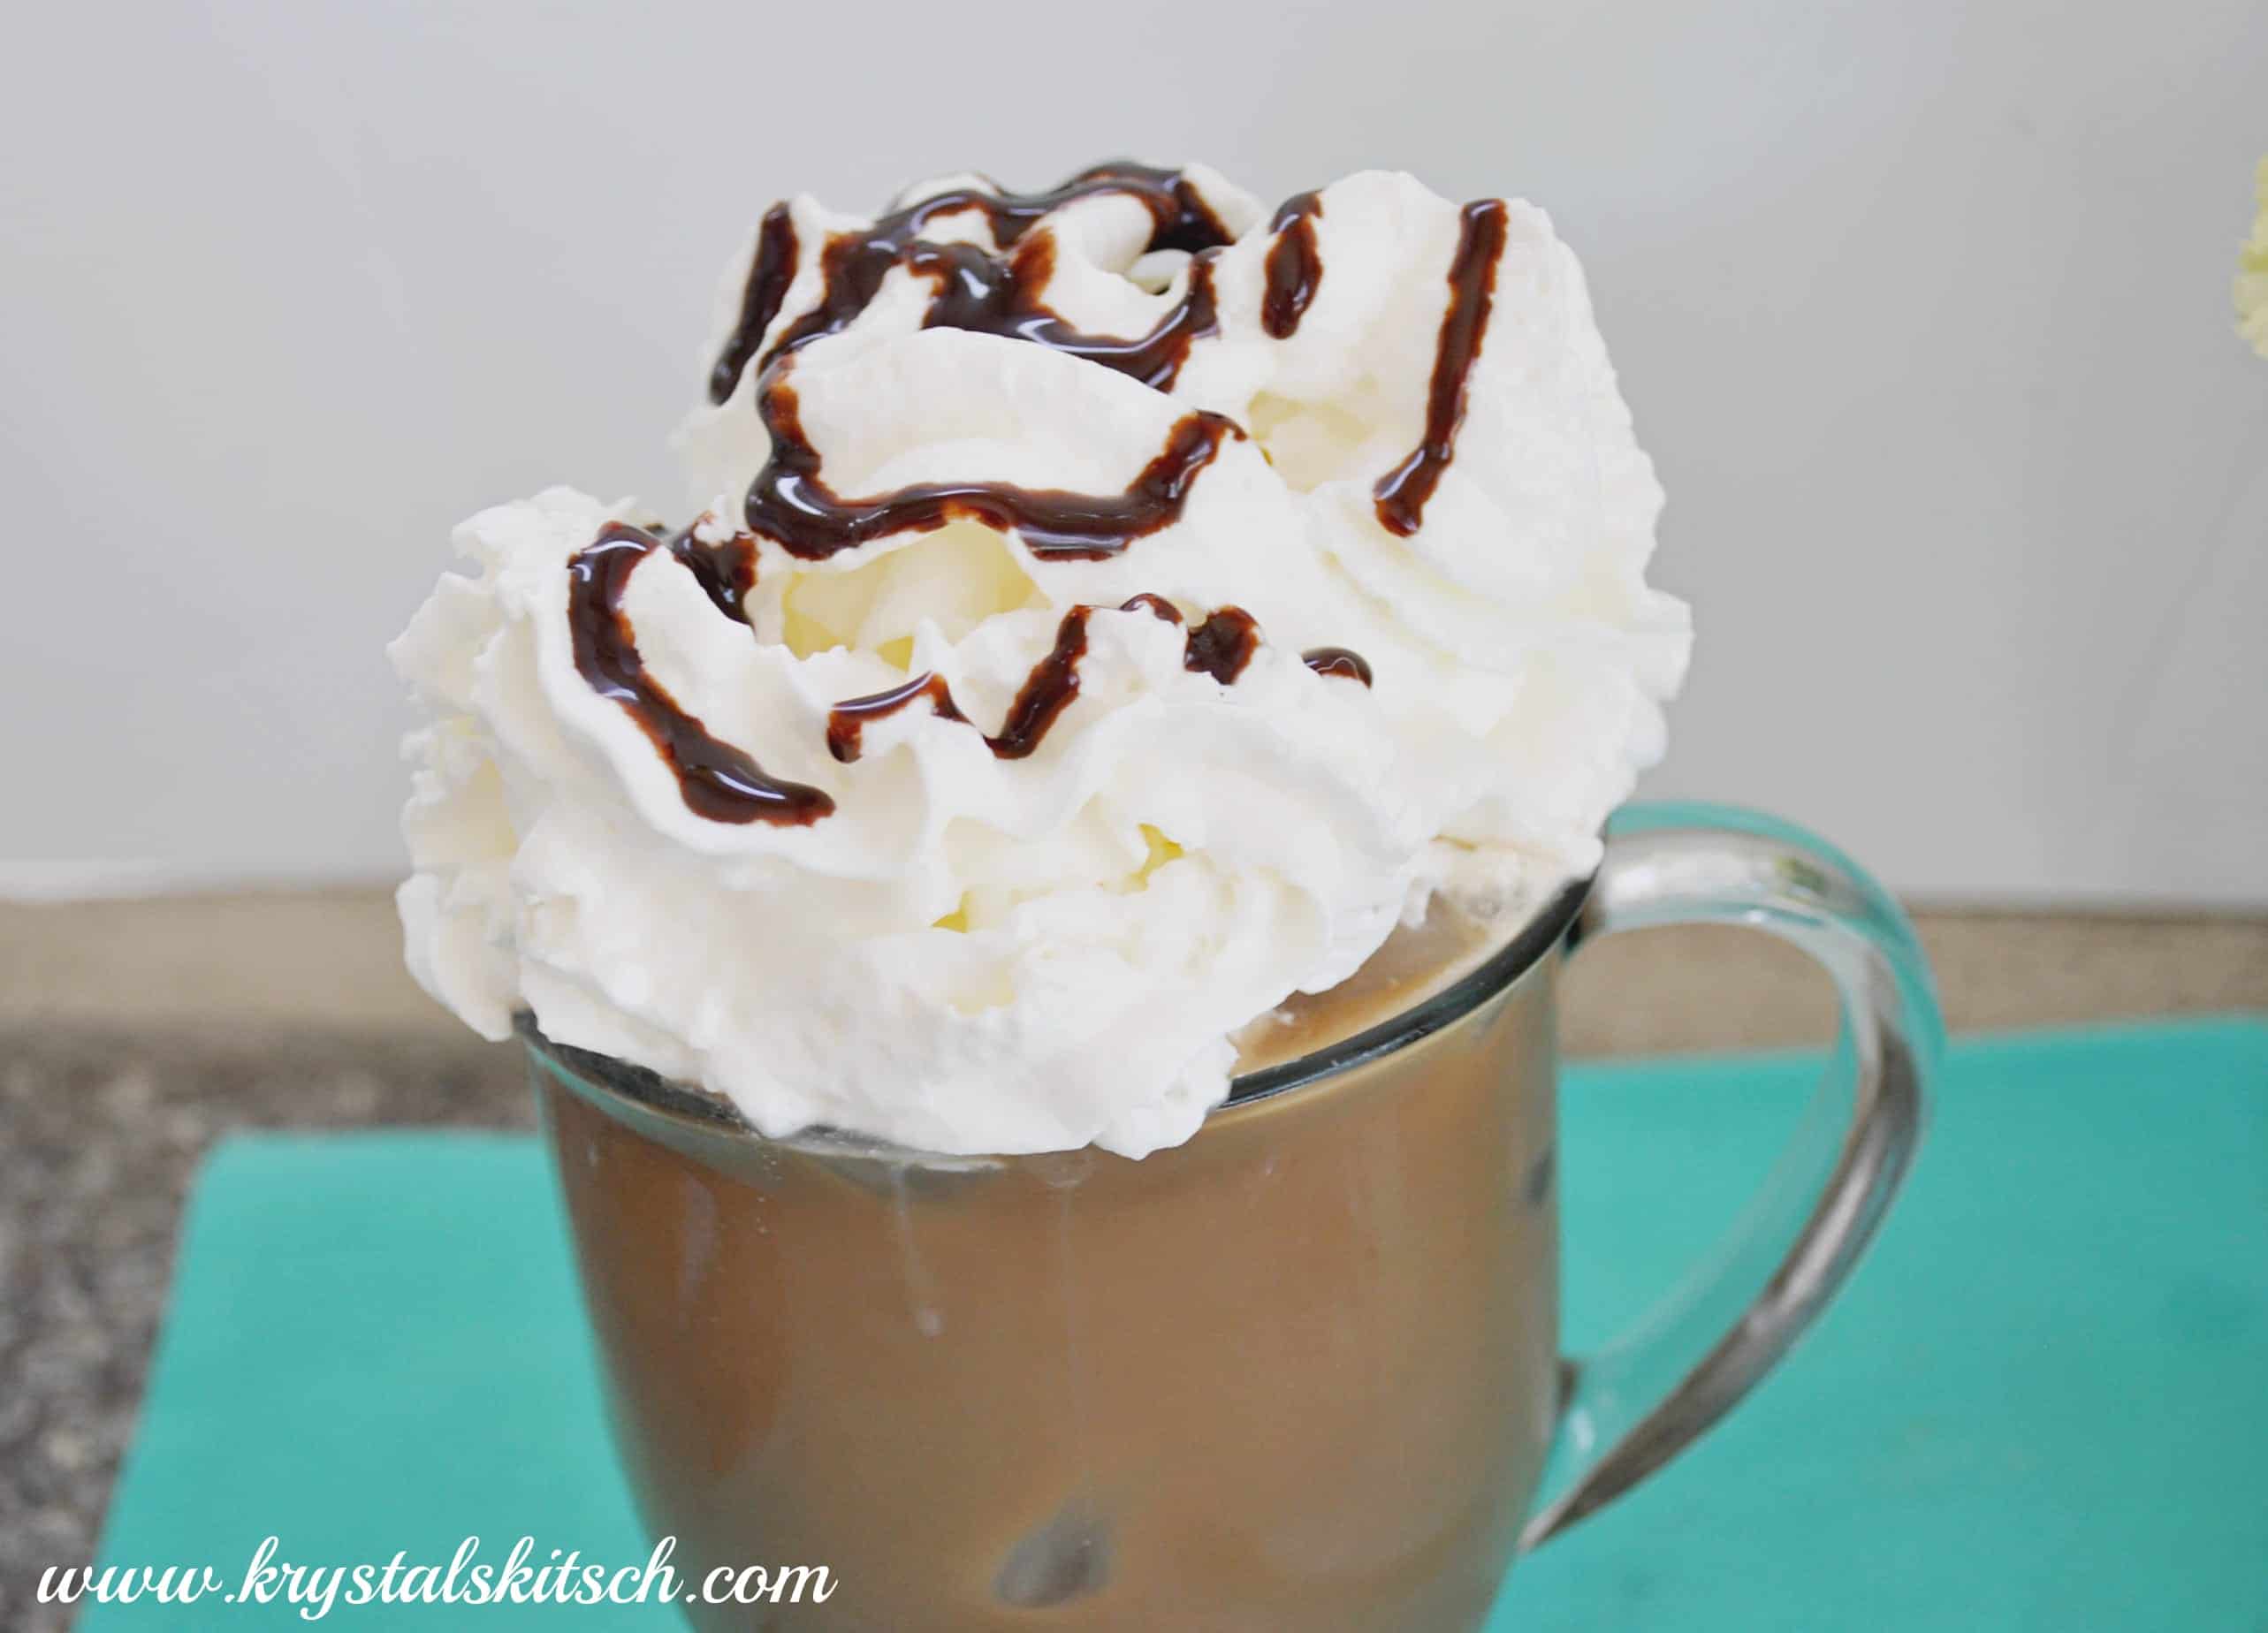 Peppermint iced coffee